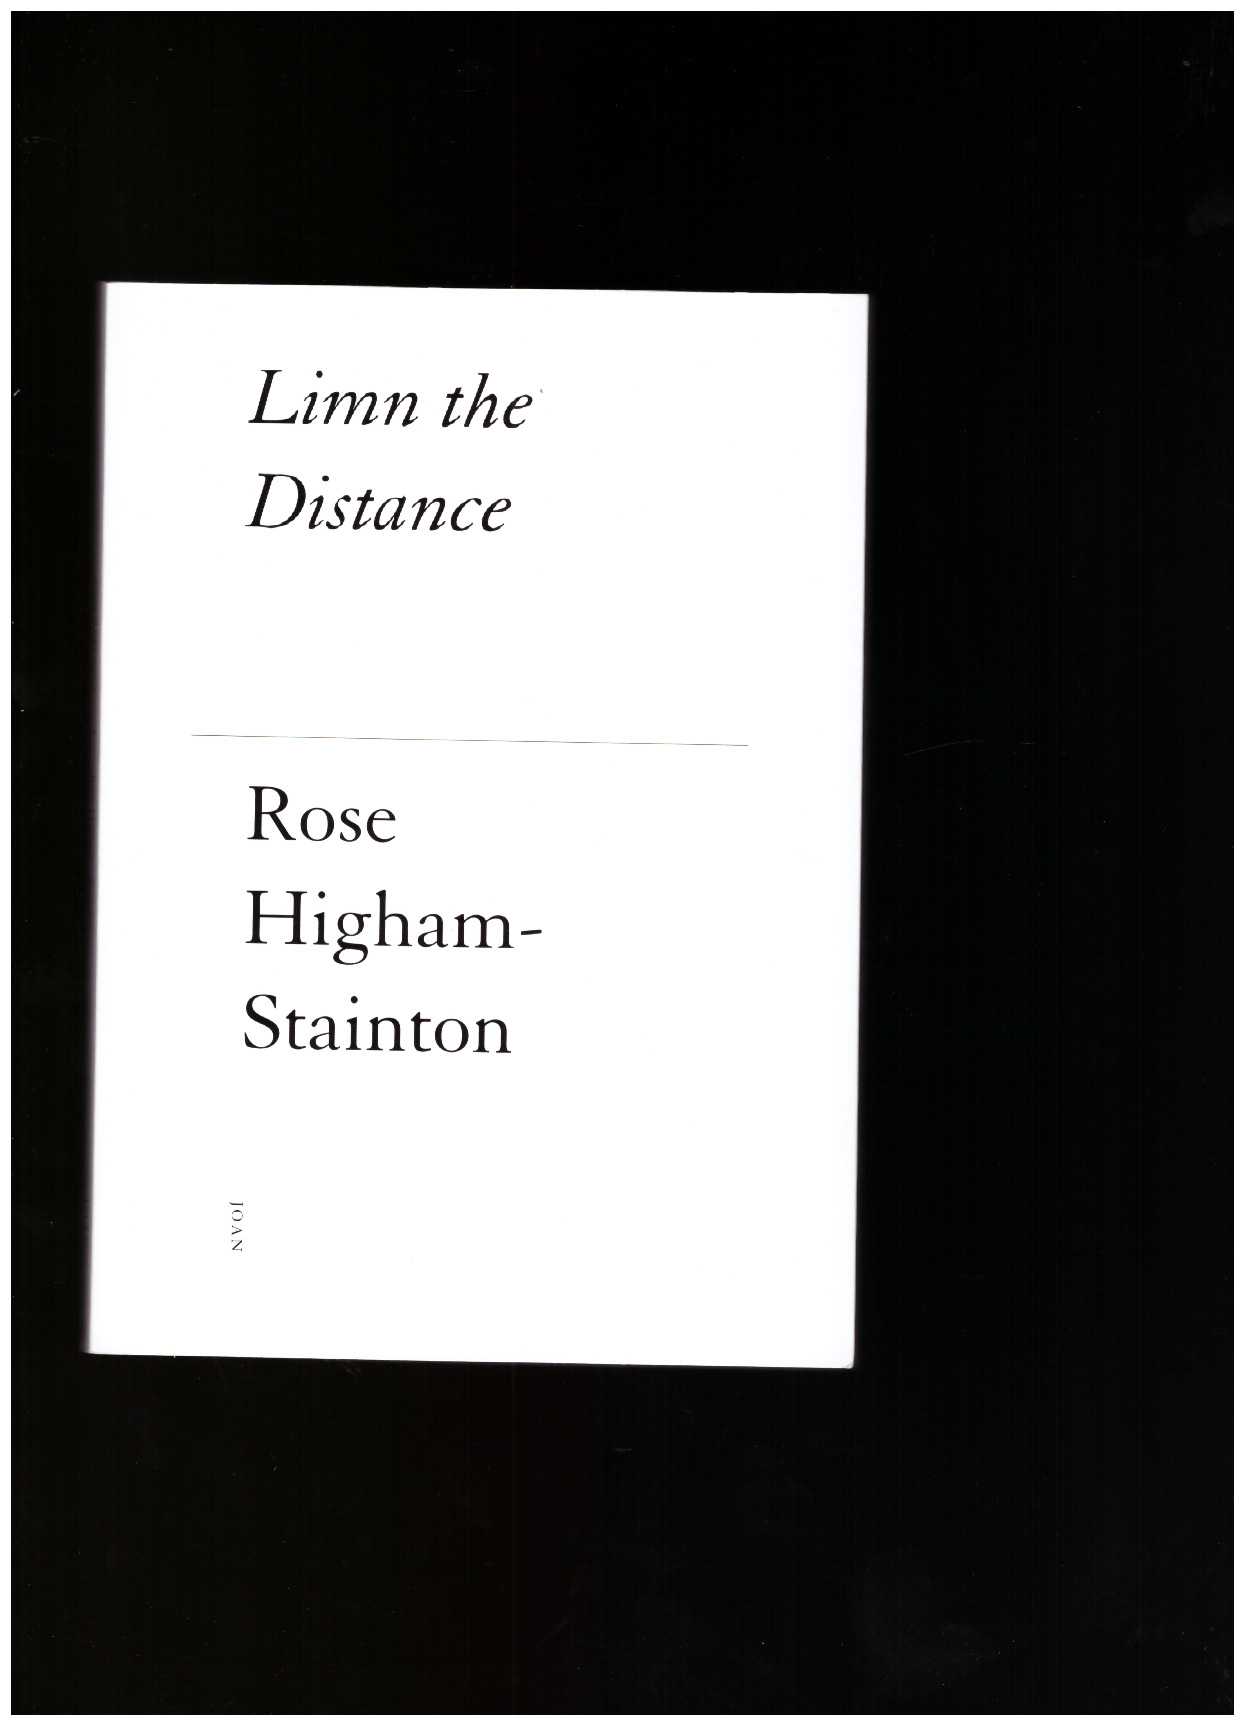 HIGHAM-STAINTON, Rose - Limn the Distance